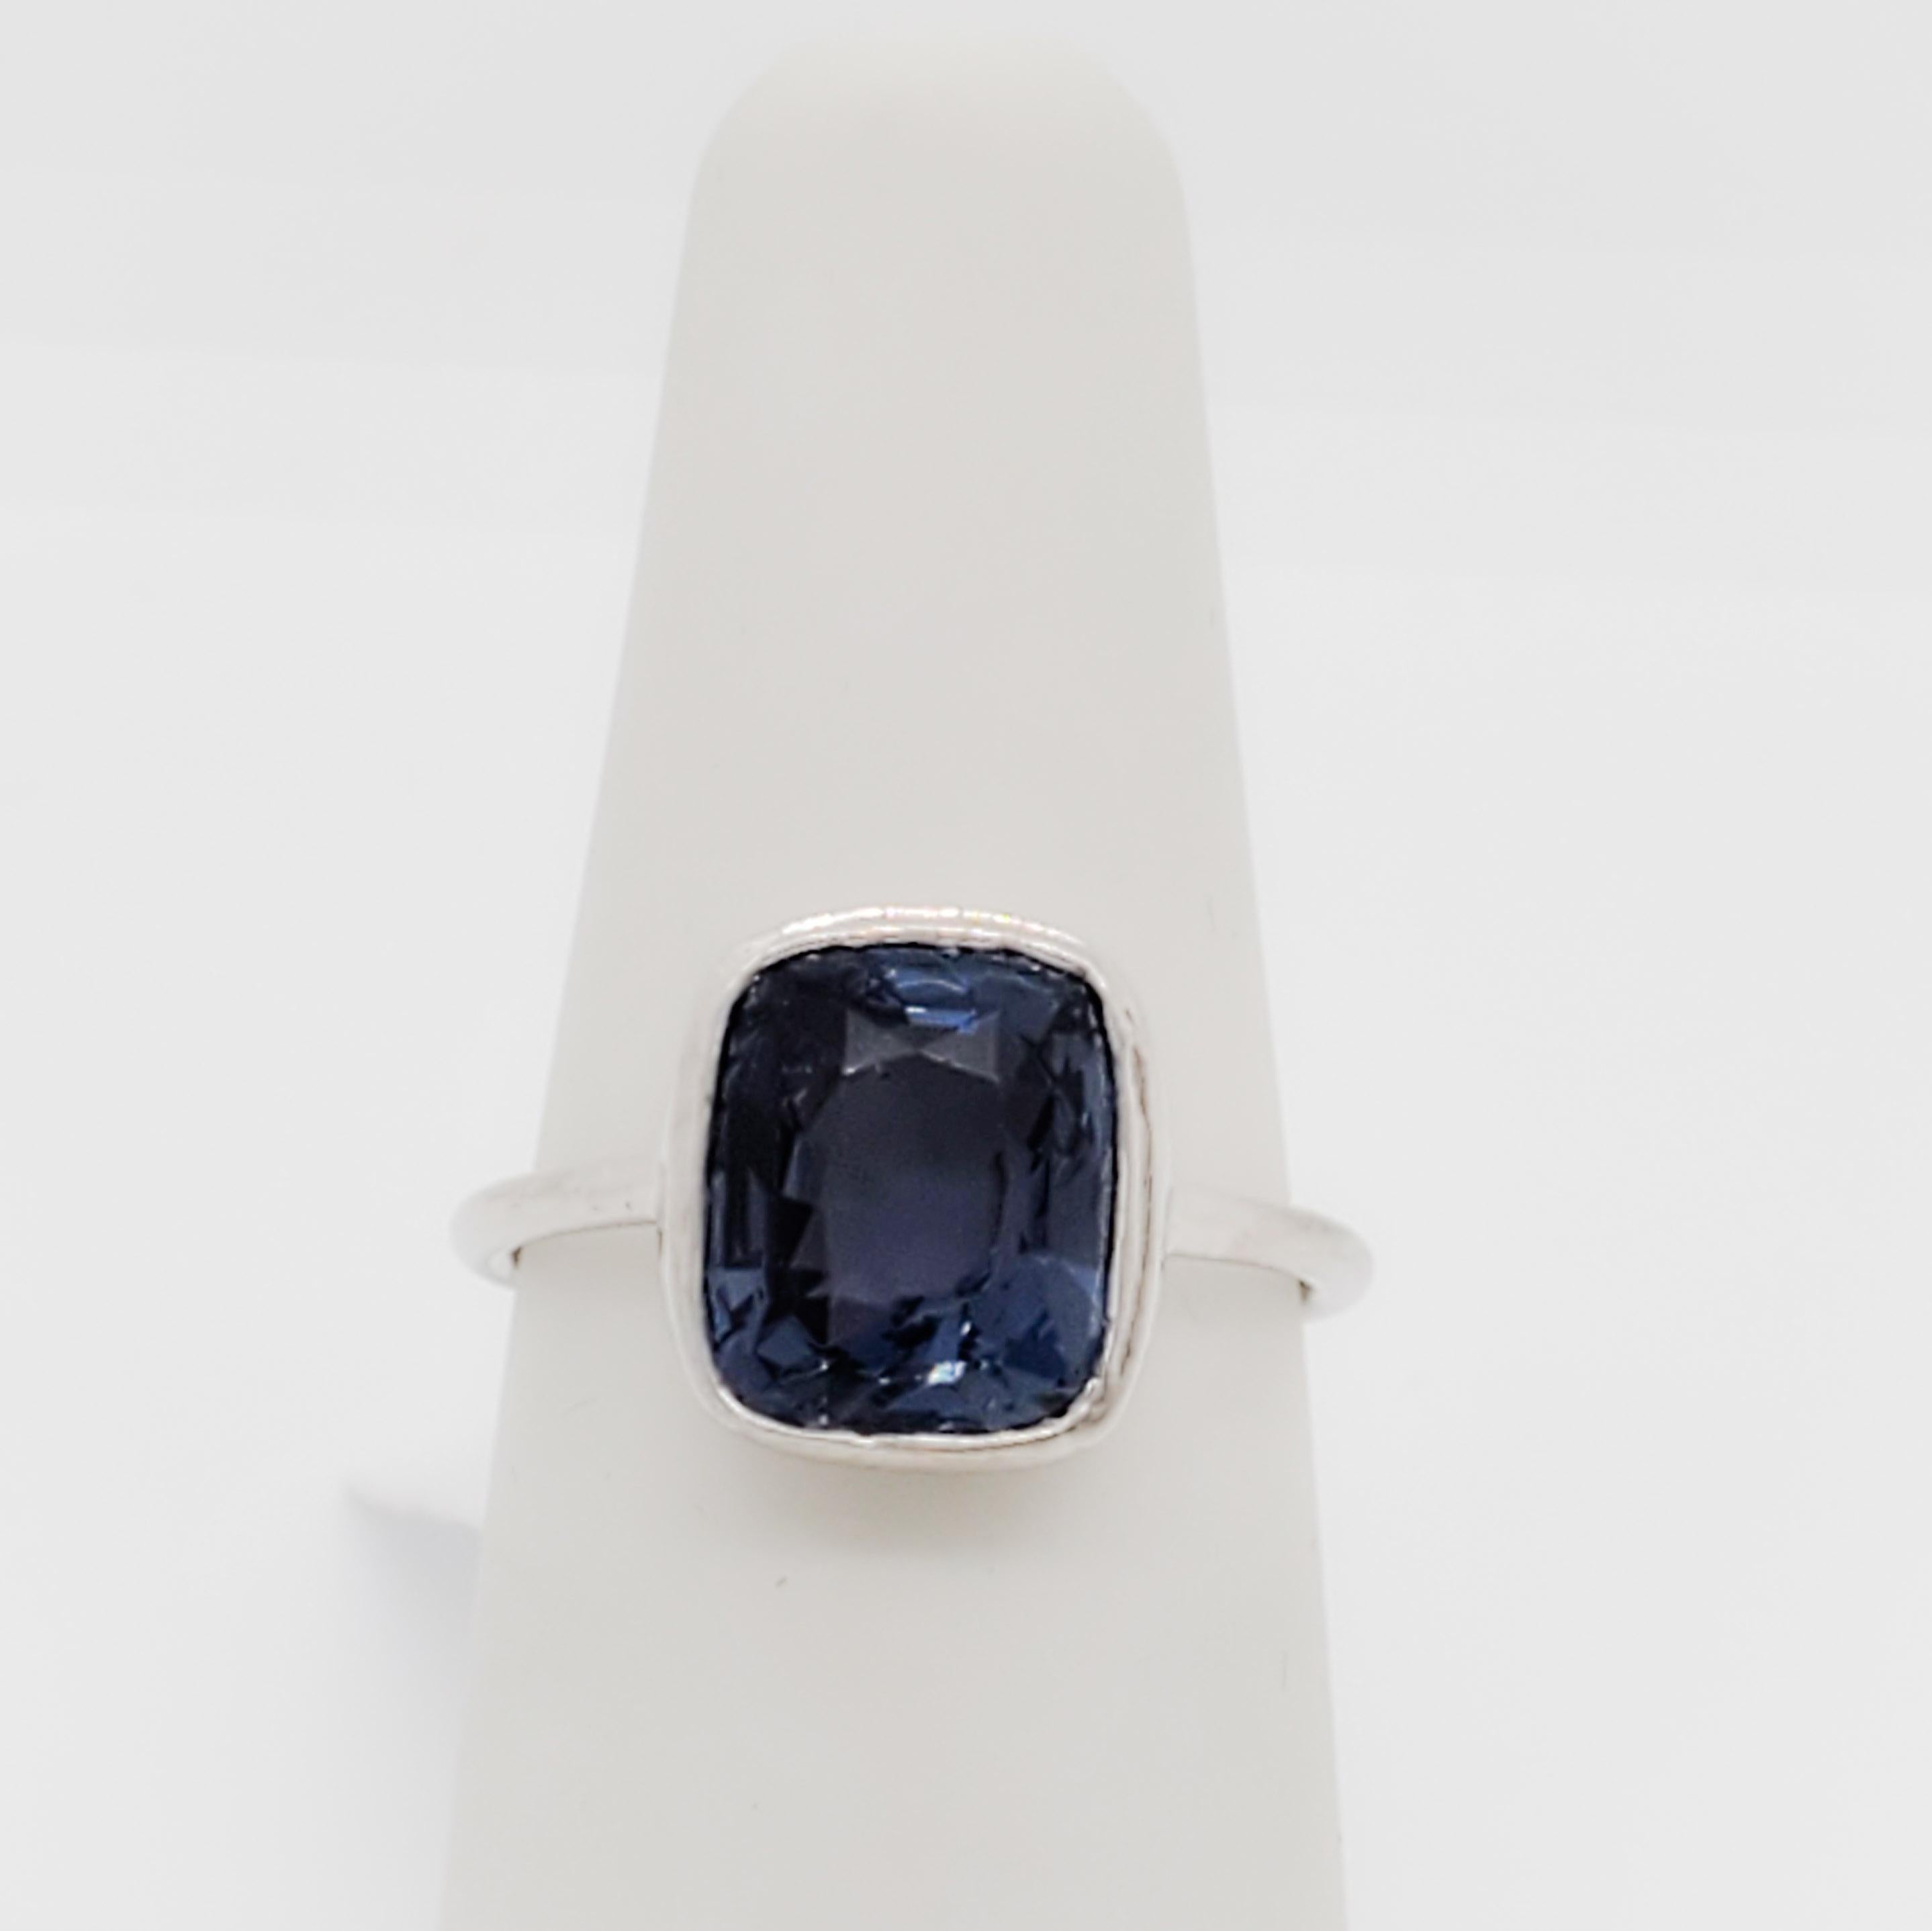 Blue Spinel Solitaire Ring in Platinum In Excellent Condition For Sale In Los Angeles, CA